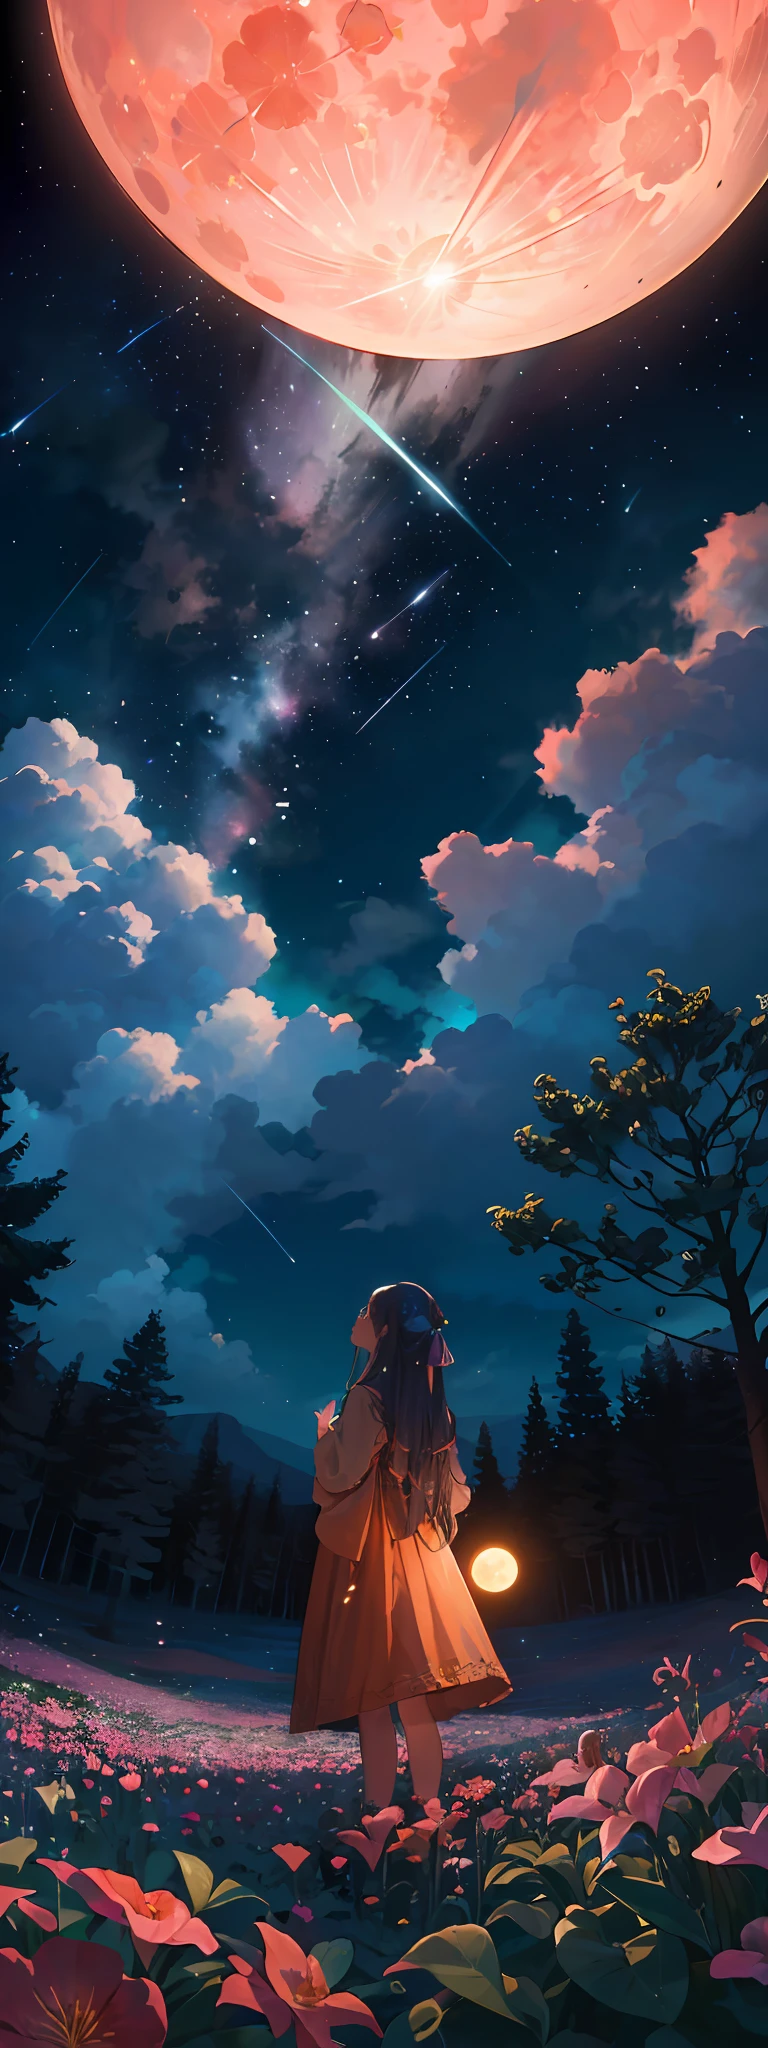 Expansive landscape photograph, (view from below with a view of the sky and wilderness below), (((little girl standing in a flower field looking up))), (full moon: 1.2), (shooting star: 0.9), (nebula: 1.3), distant mountain, tree break production art, (warm light source: 1.2), (firefly: 1.2), lamp, purple and orange, intricate detail, volume lighting, realism break (masterpiece: 1.2) (Best Quality), 4K, Ultra-Detailed, (Dynamic Configuration: 1.4), Highly Detailed and Colorful Details, (Iridescent Colors: 1.2), (Glowing Lighting, Atmospheric Lighting), Dreamy, Magical, (Solo: 1.2)